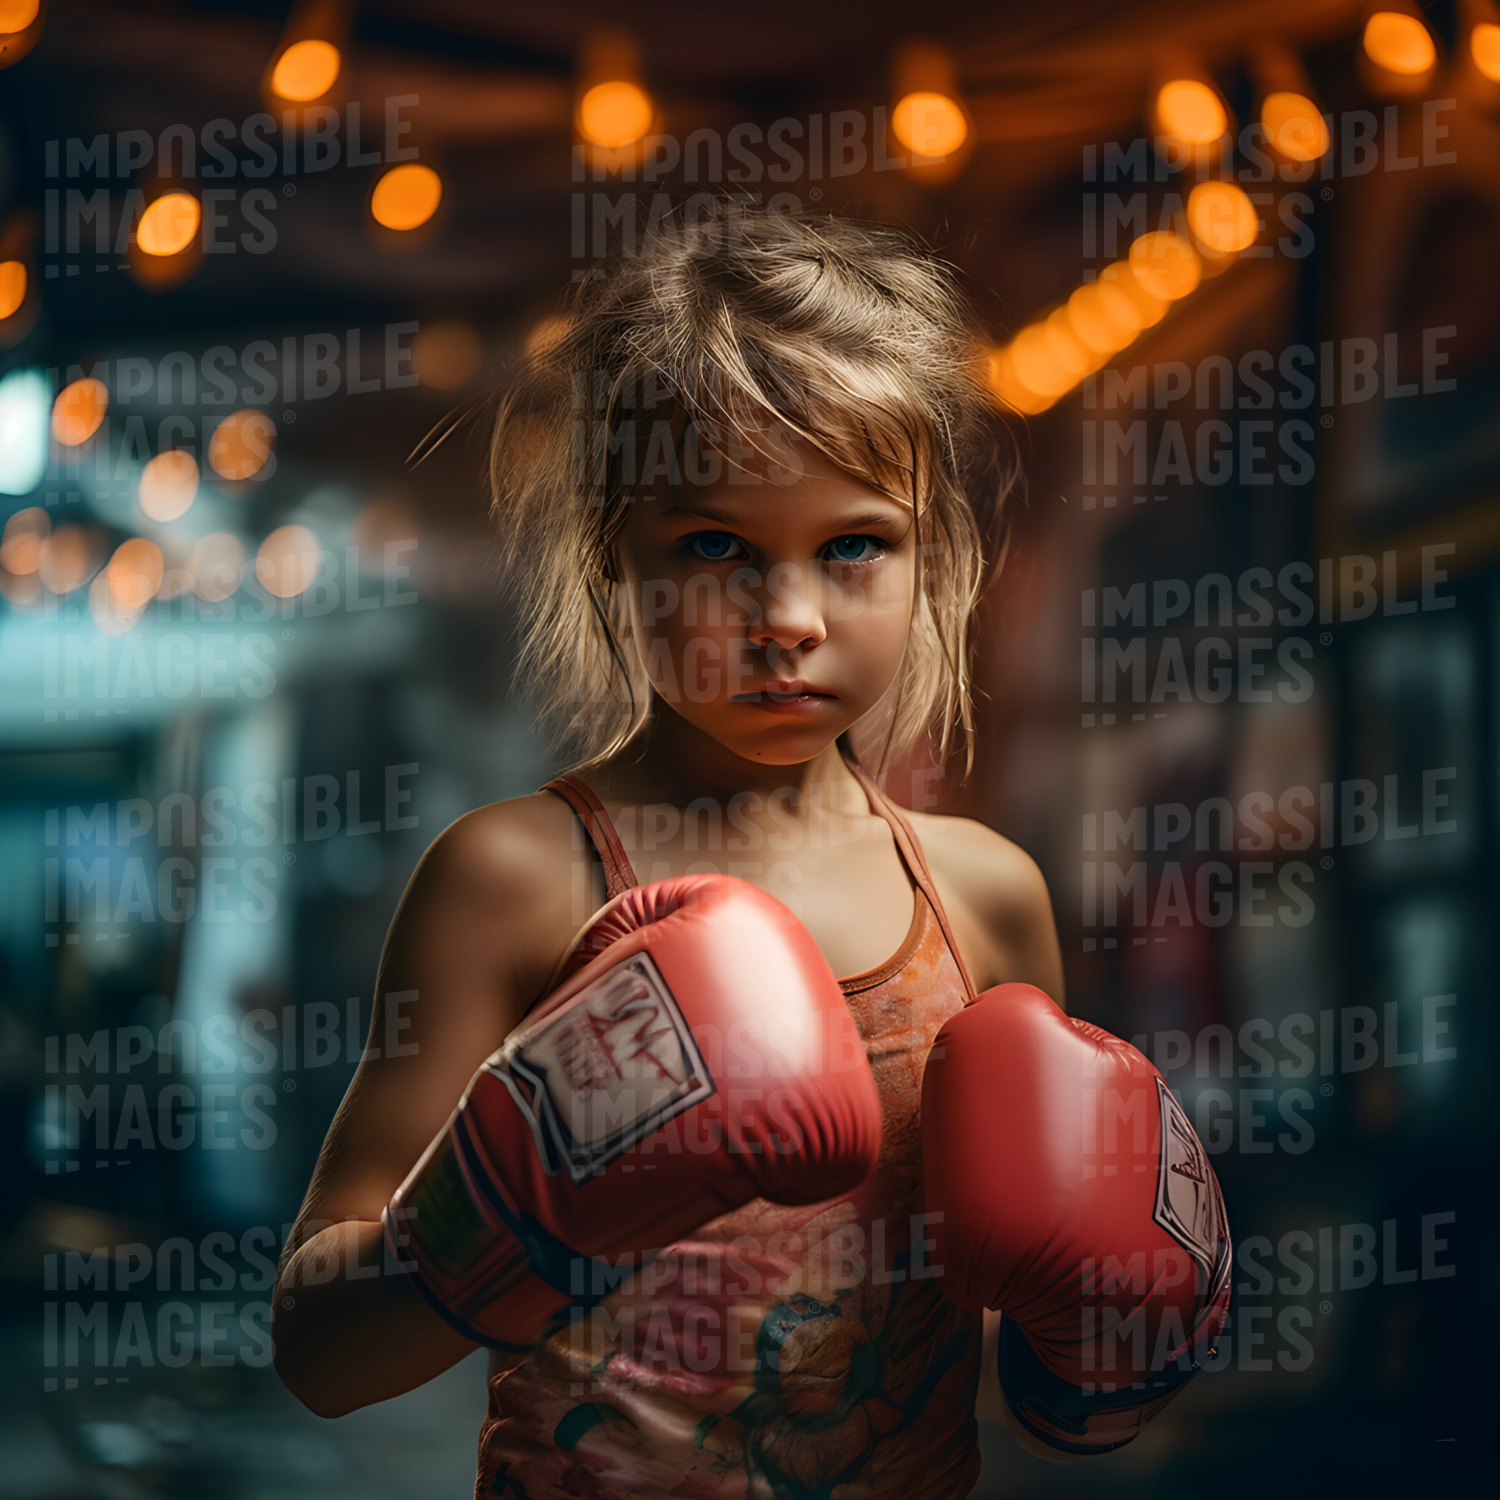 Small child wearing boxing gloves and ready to fight